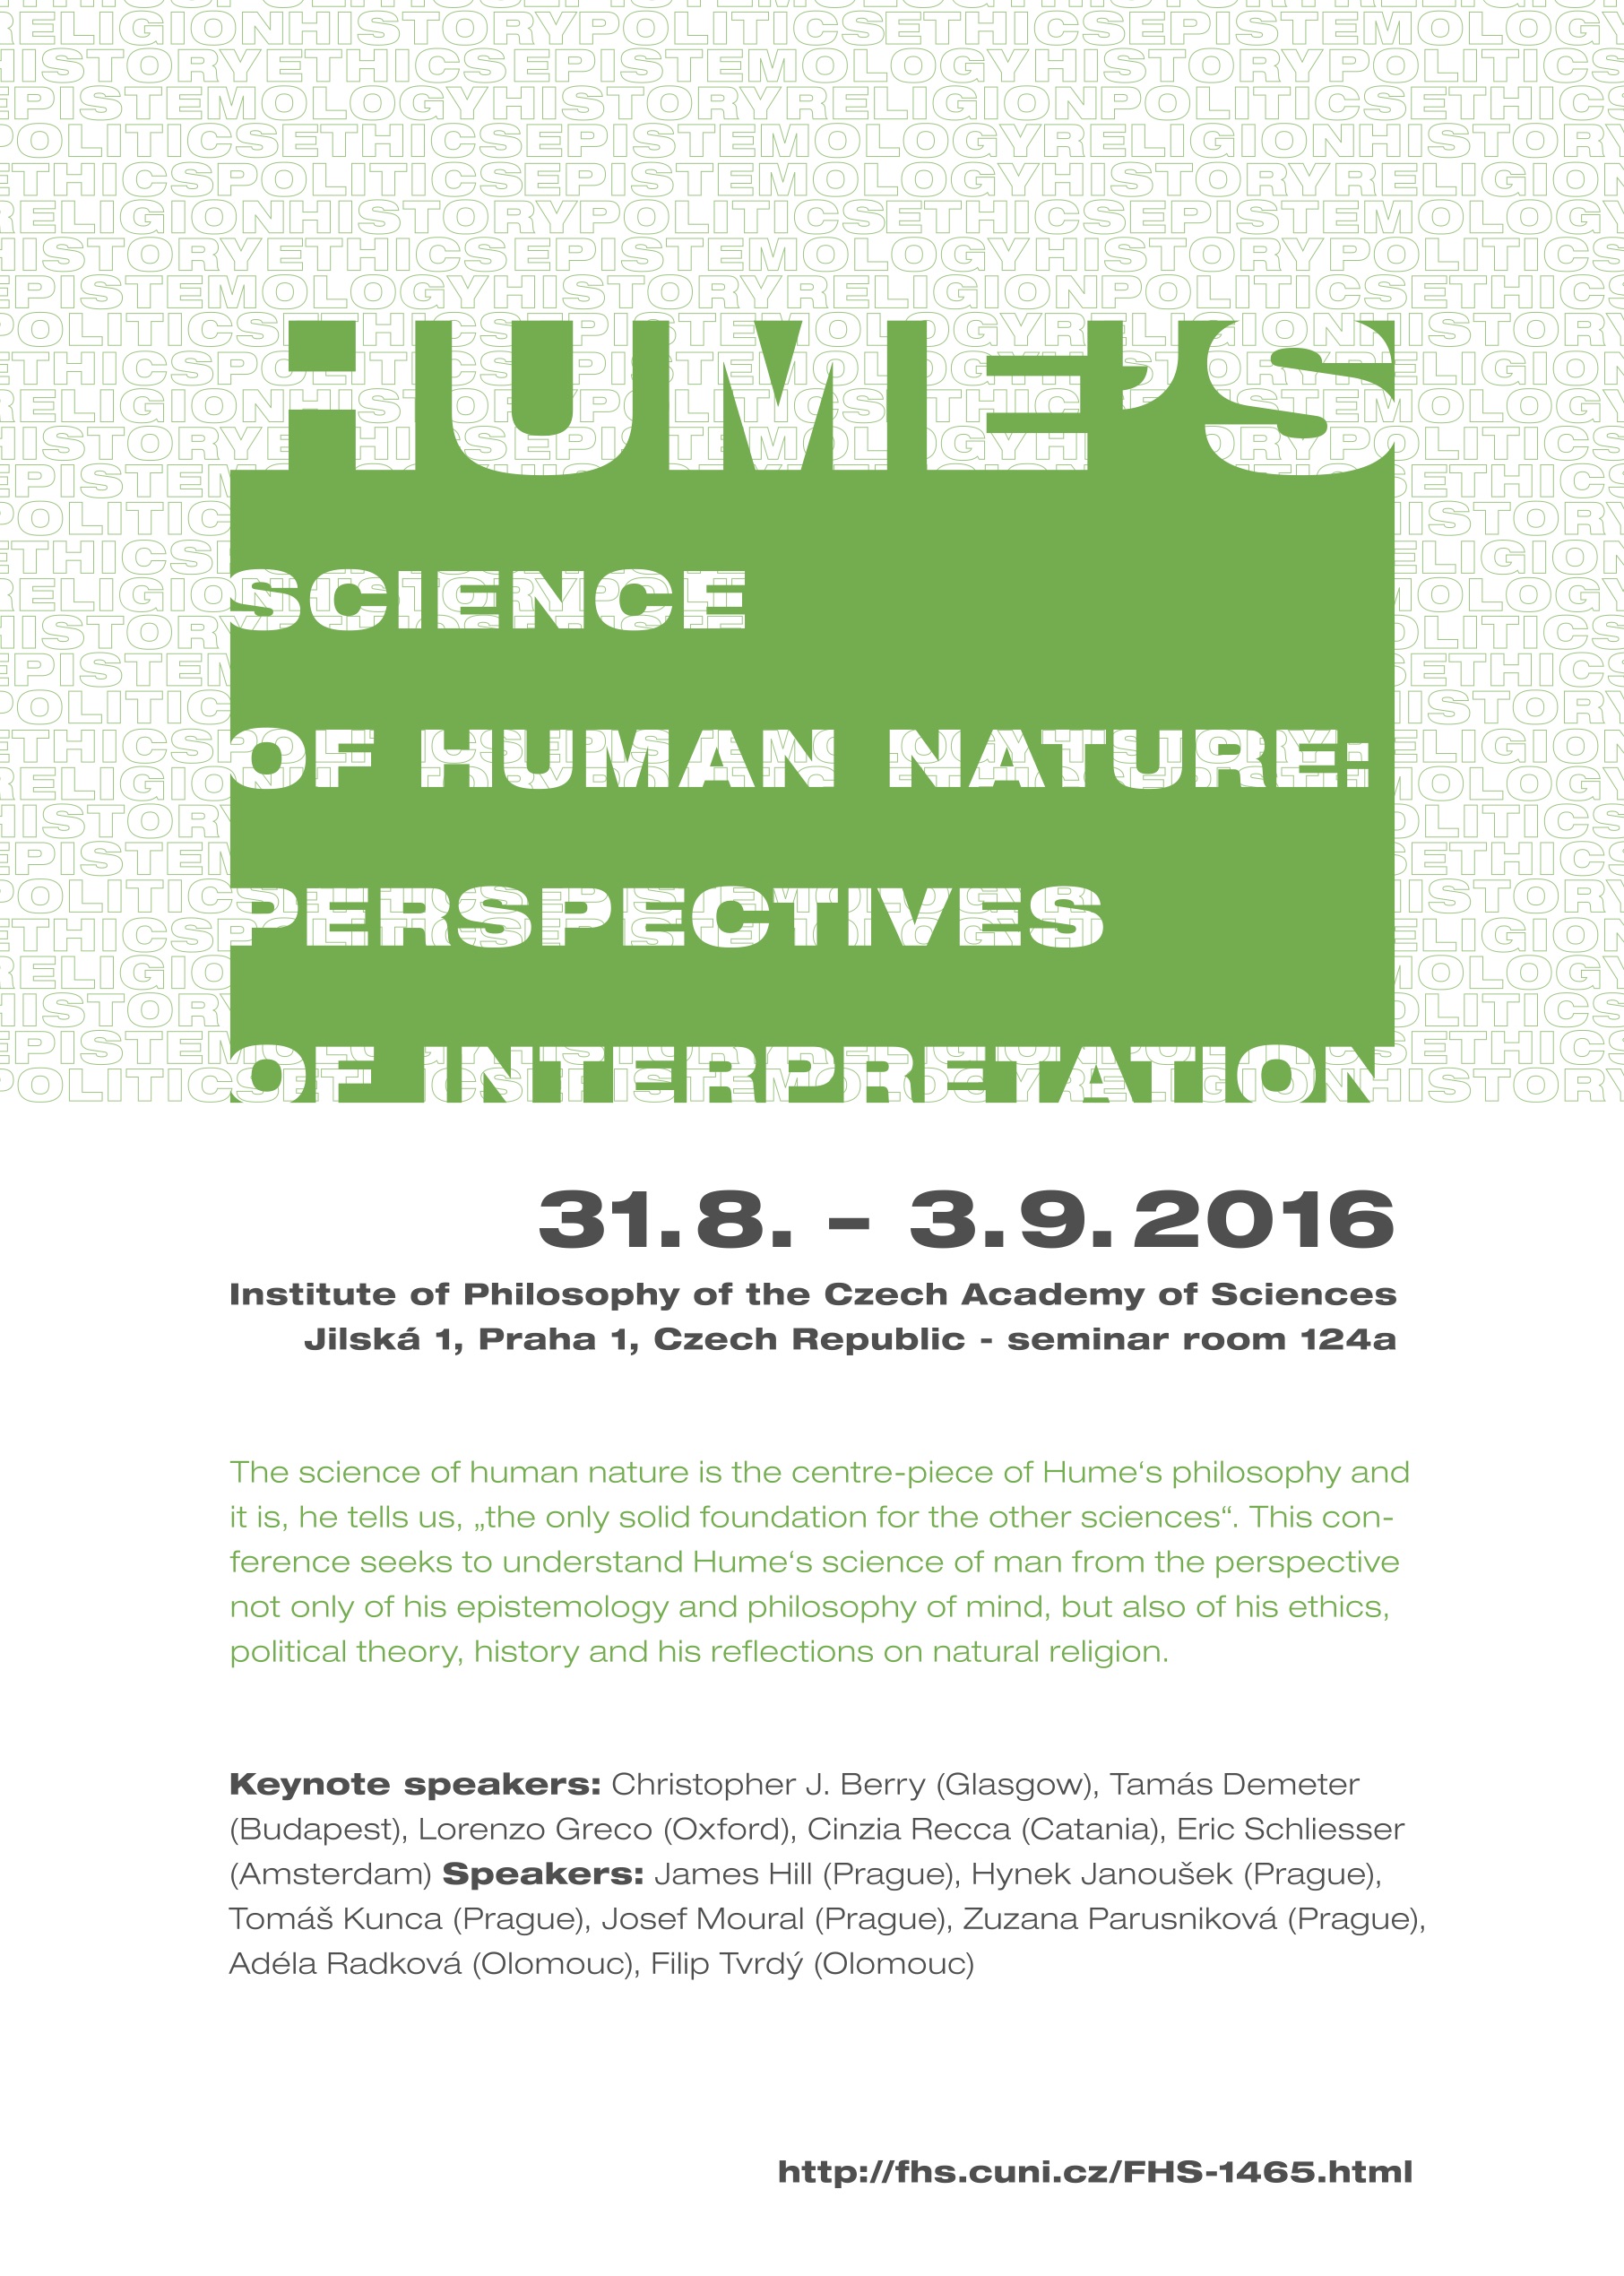 Poster Hume in Prague 2016